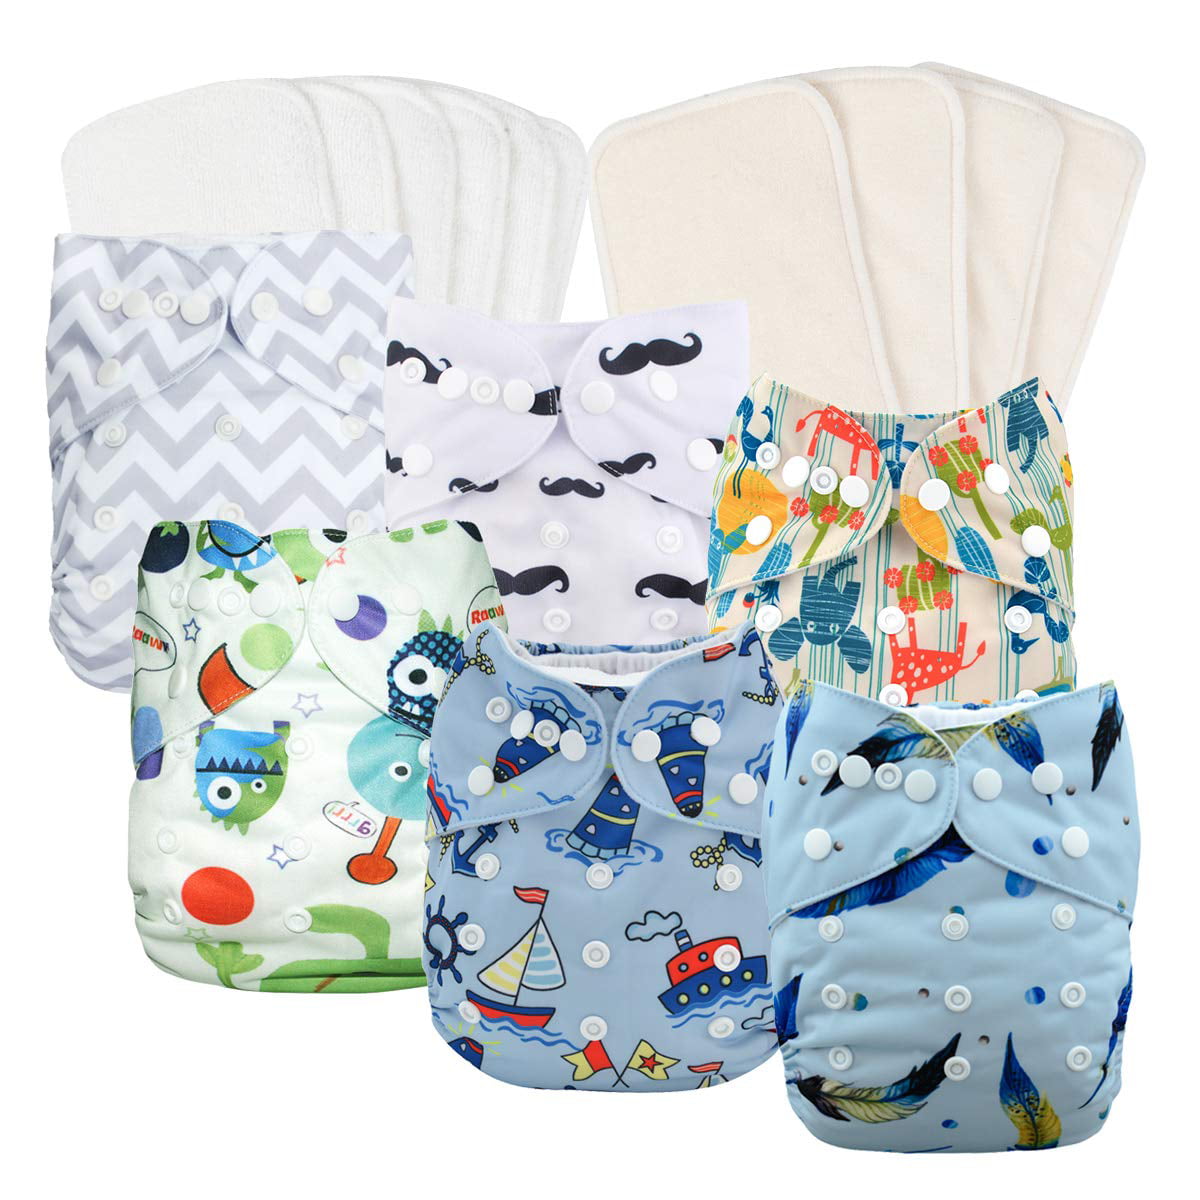 Washable Baby Reusable Cloth Diapers One Size TPU Pocket Nappy Covers Inserts 